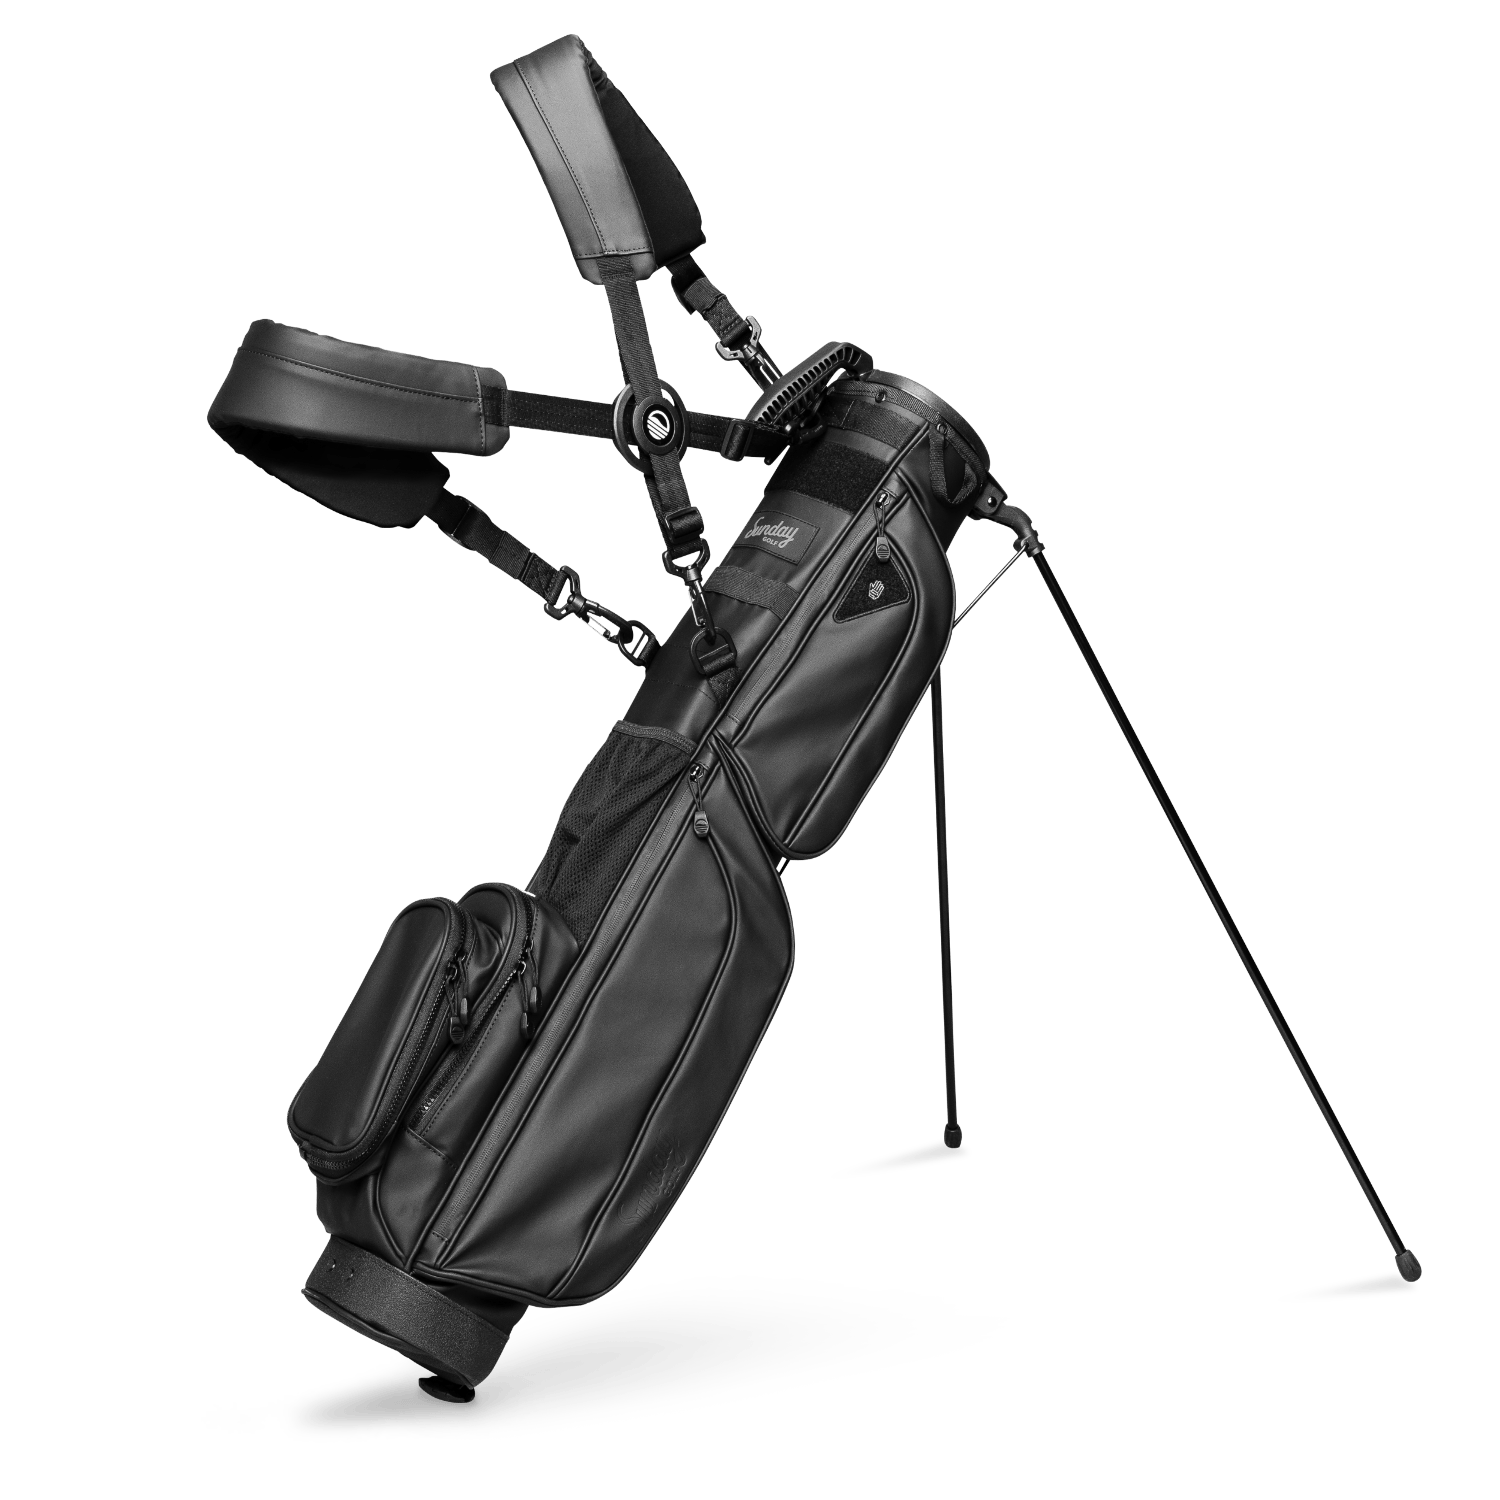 Sunday Golf Loma XL Review – Play Golf All Year